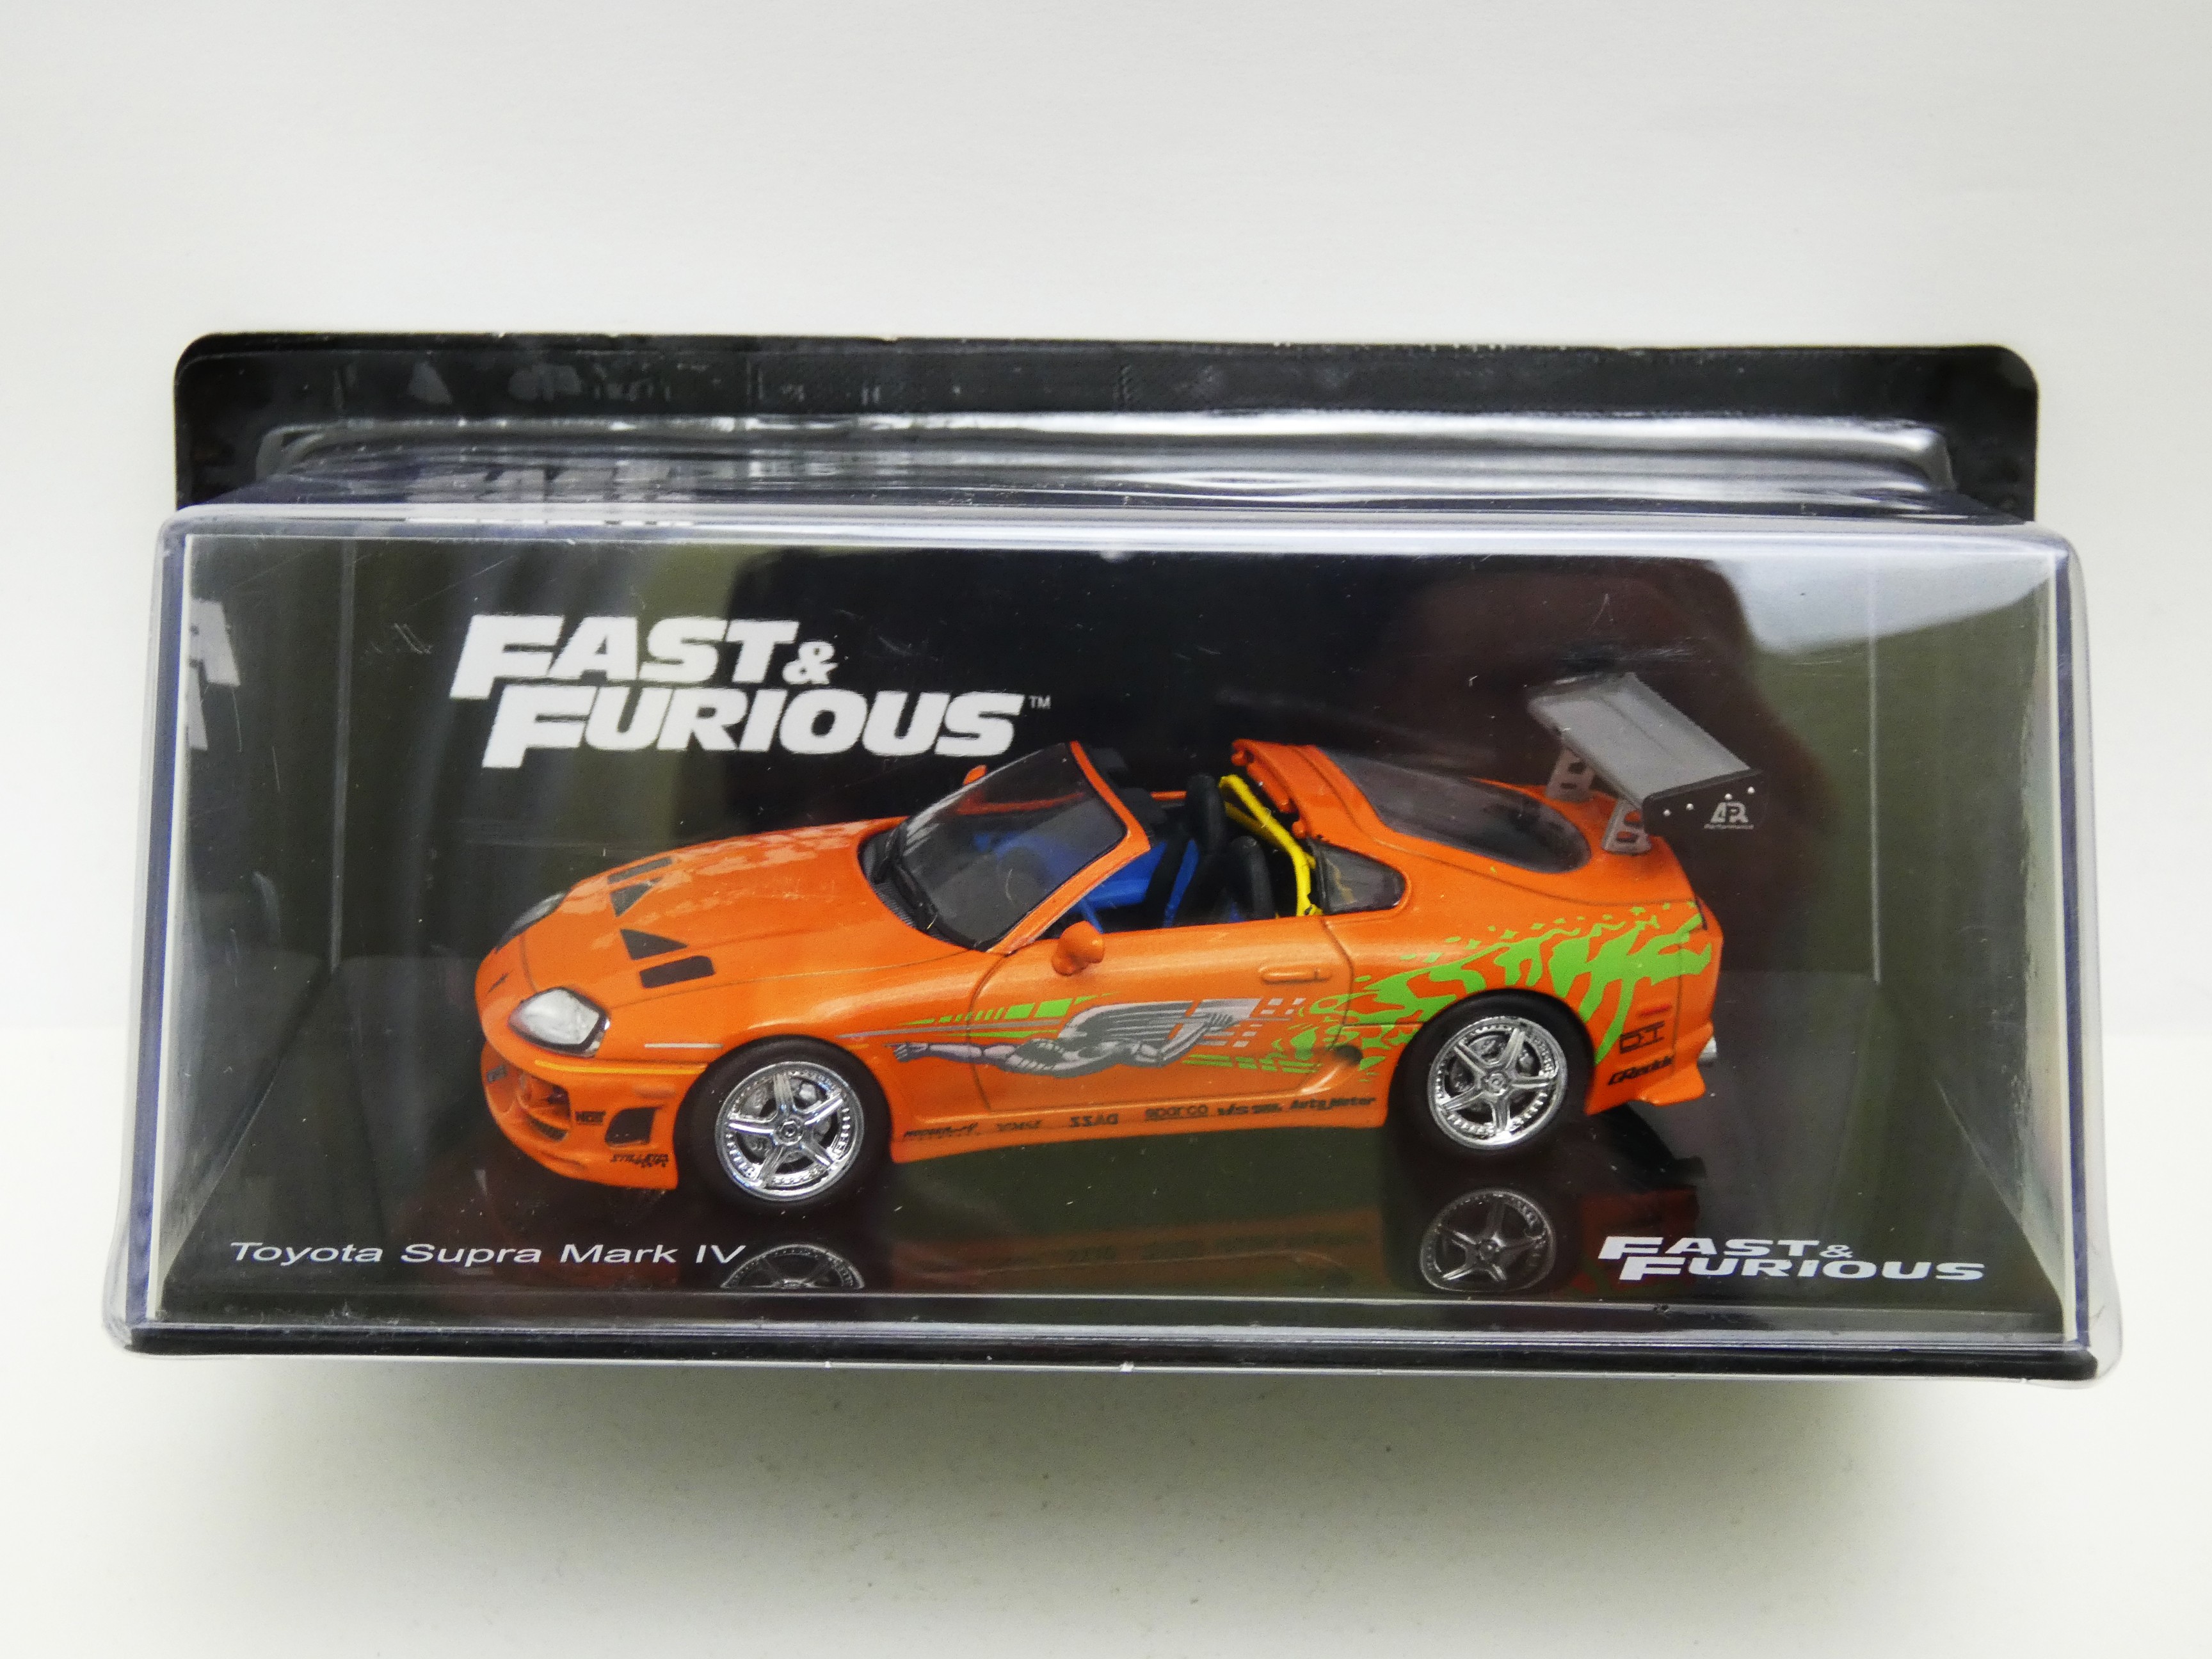 Fast and Furious vehicles